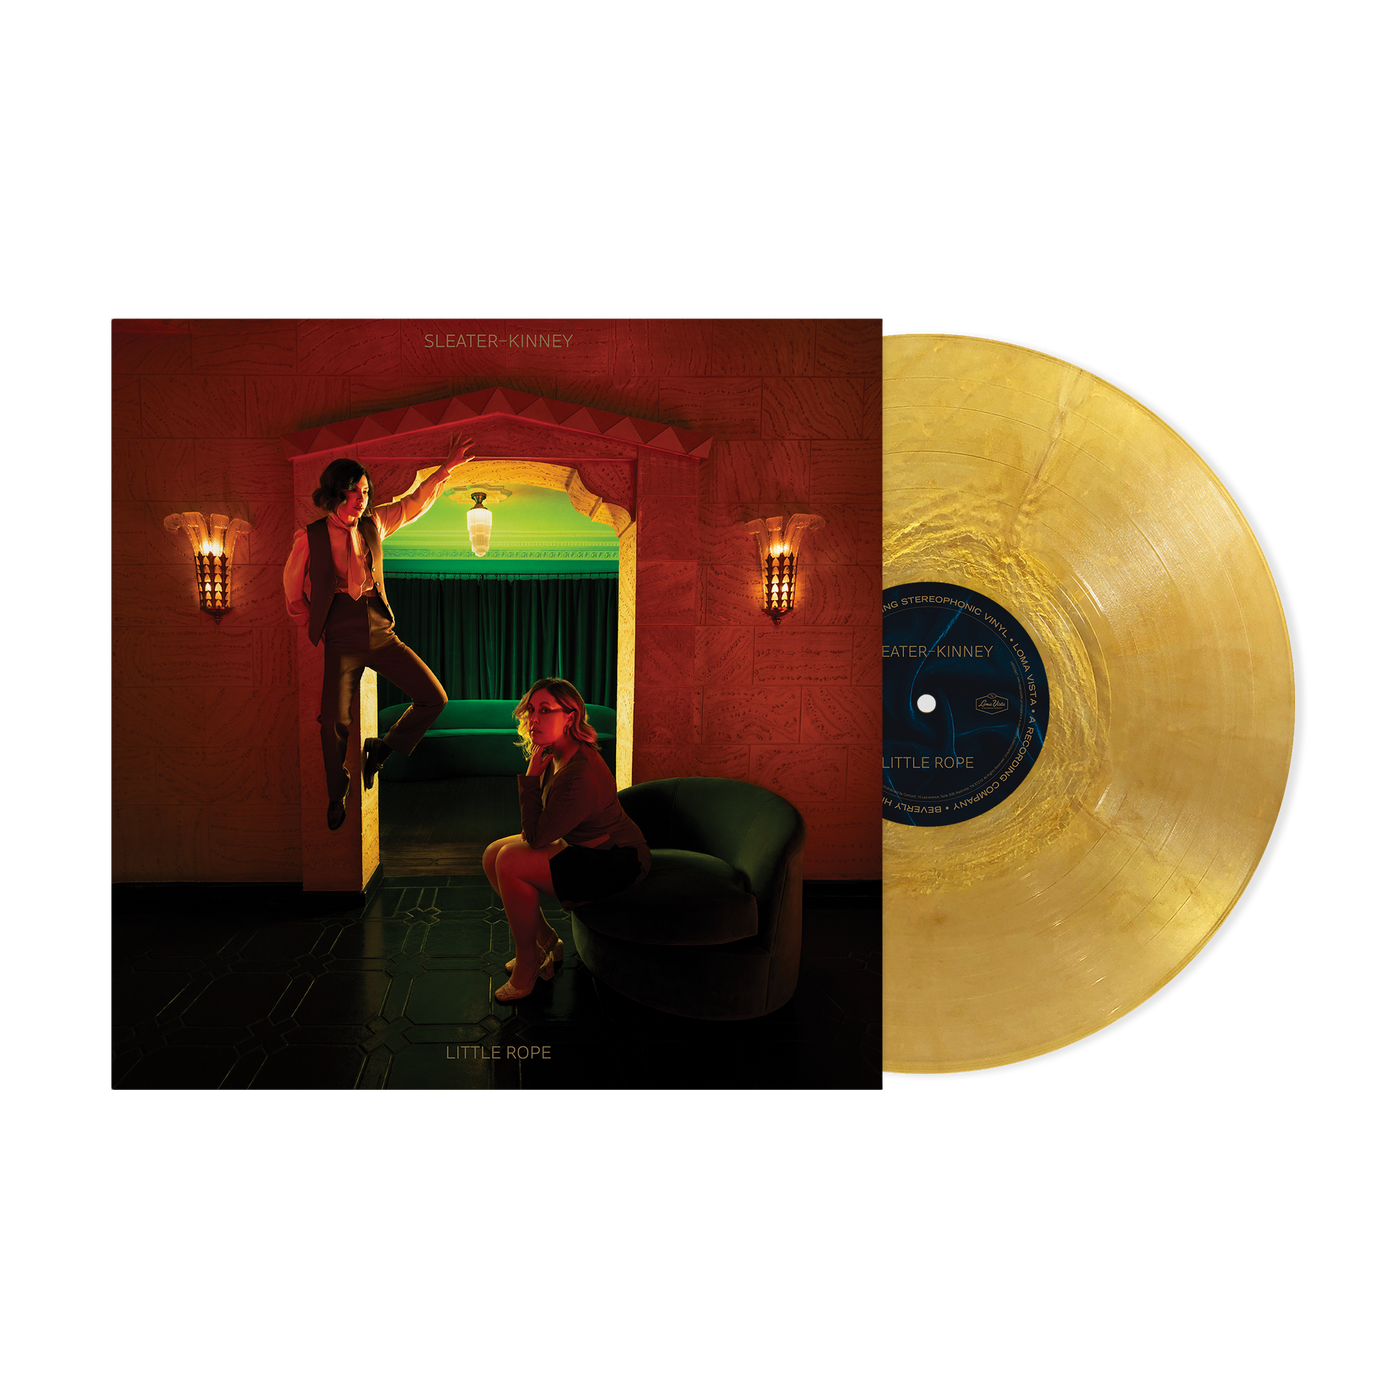 Little Rope Limited Edition "Metallic Gold" LP